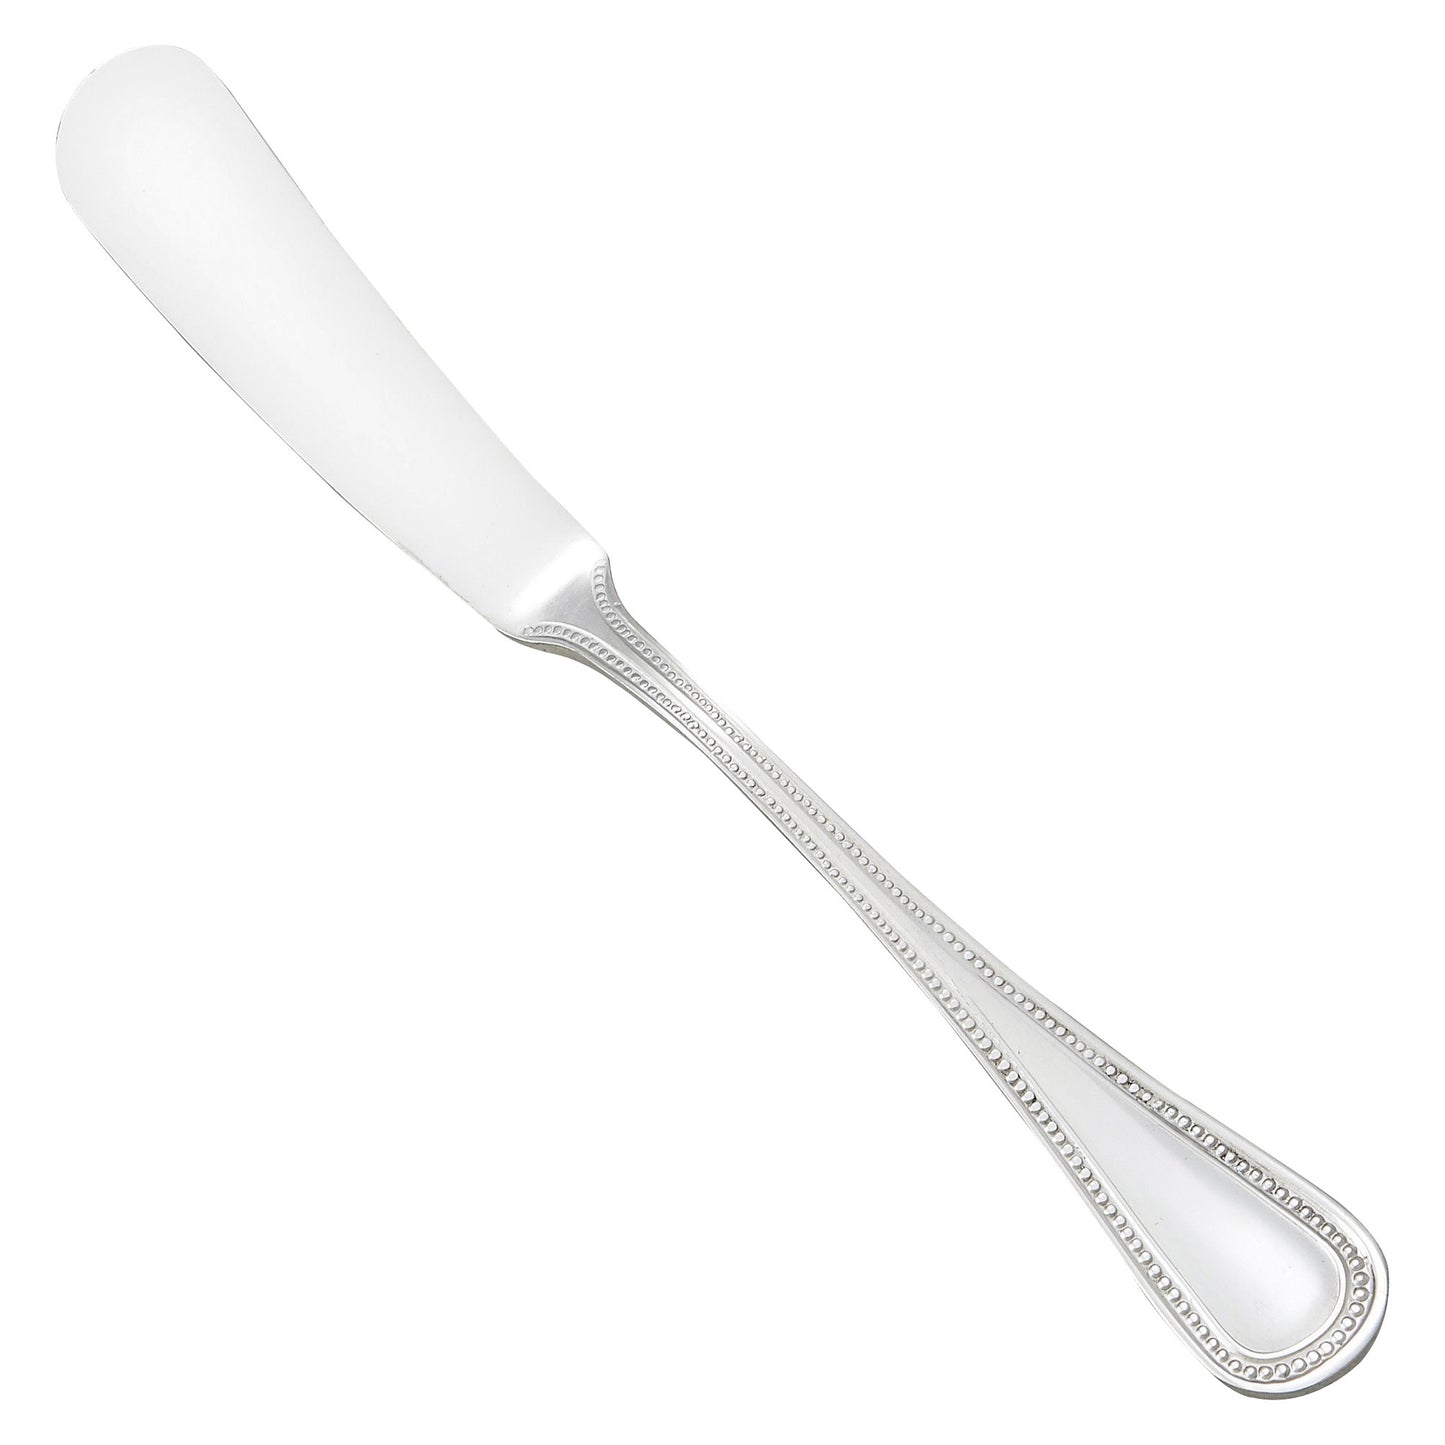 0036-12 - Deluxe Pearl Butter Spreader, 18/8 Extra Heavyweight